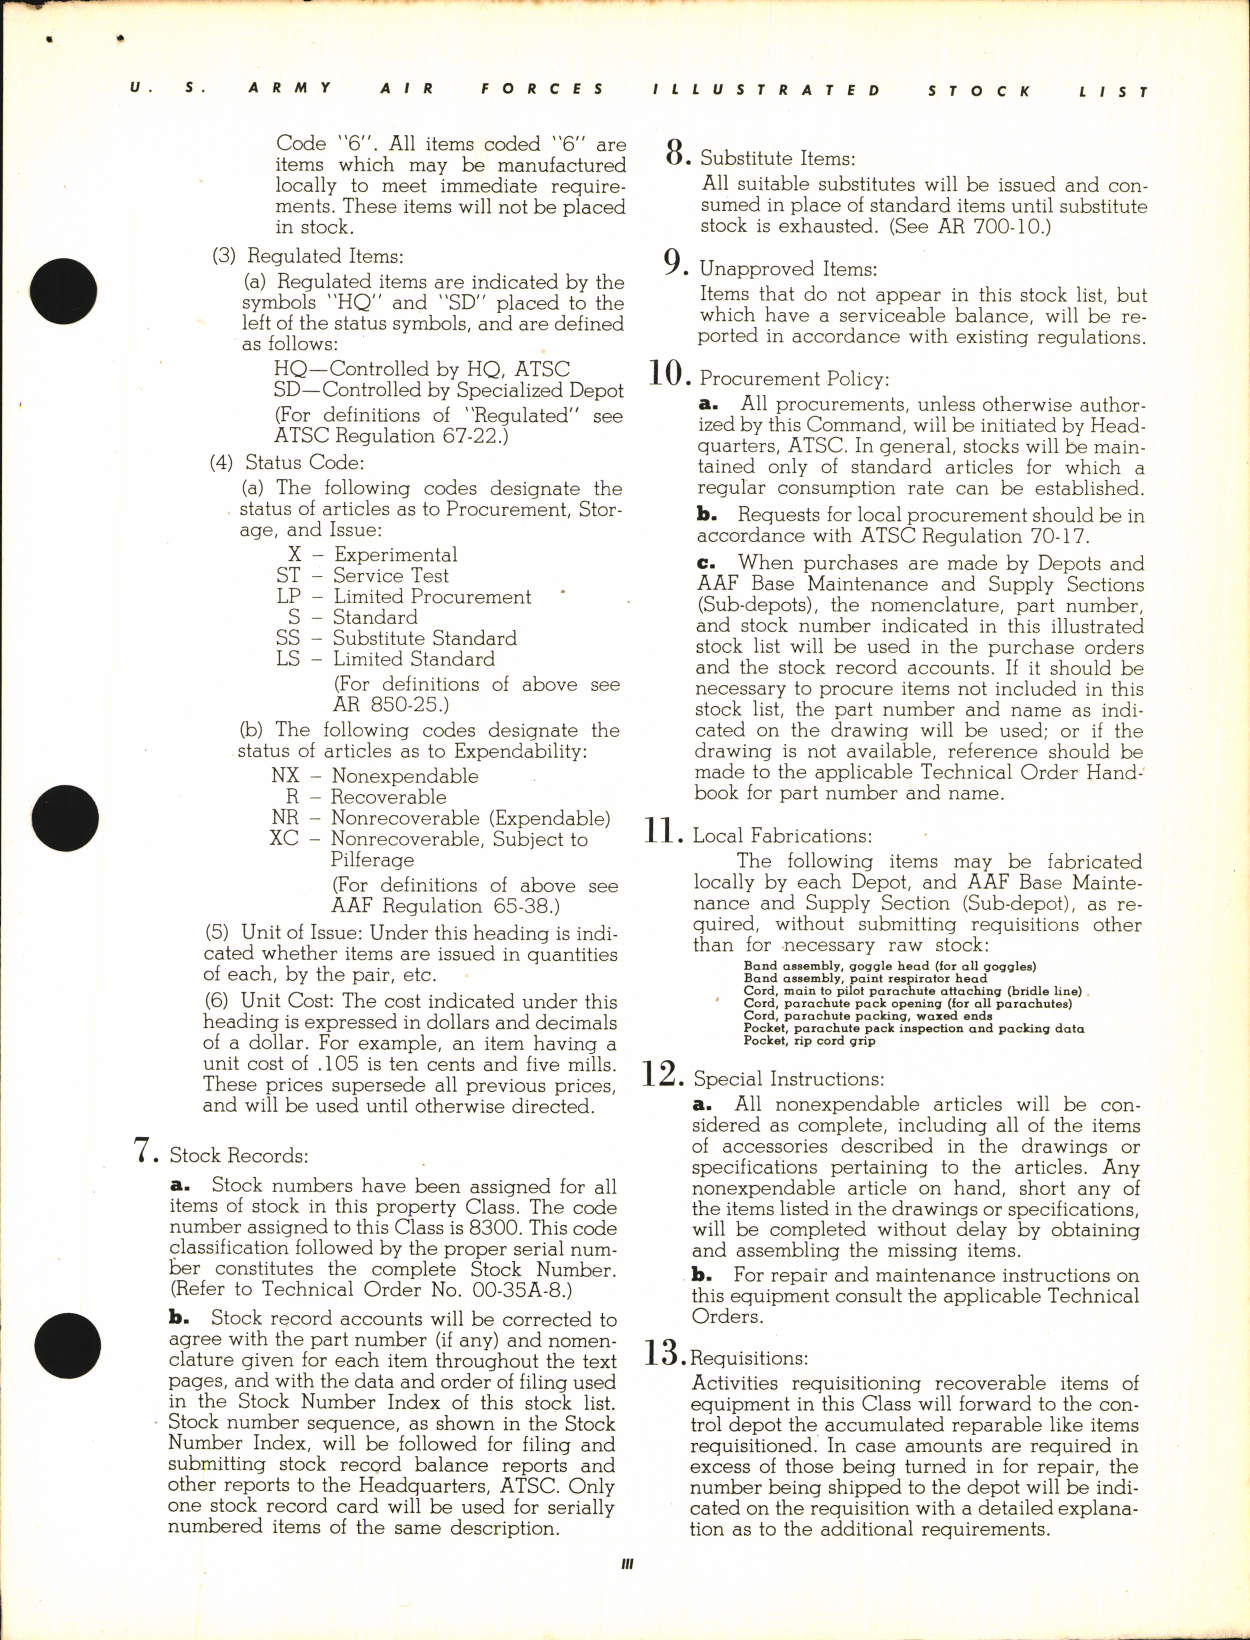 Sample page 5 from AirCorps Library document: Illustrated Stock List Clothing, Parachutes, Equipment and Supplies